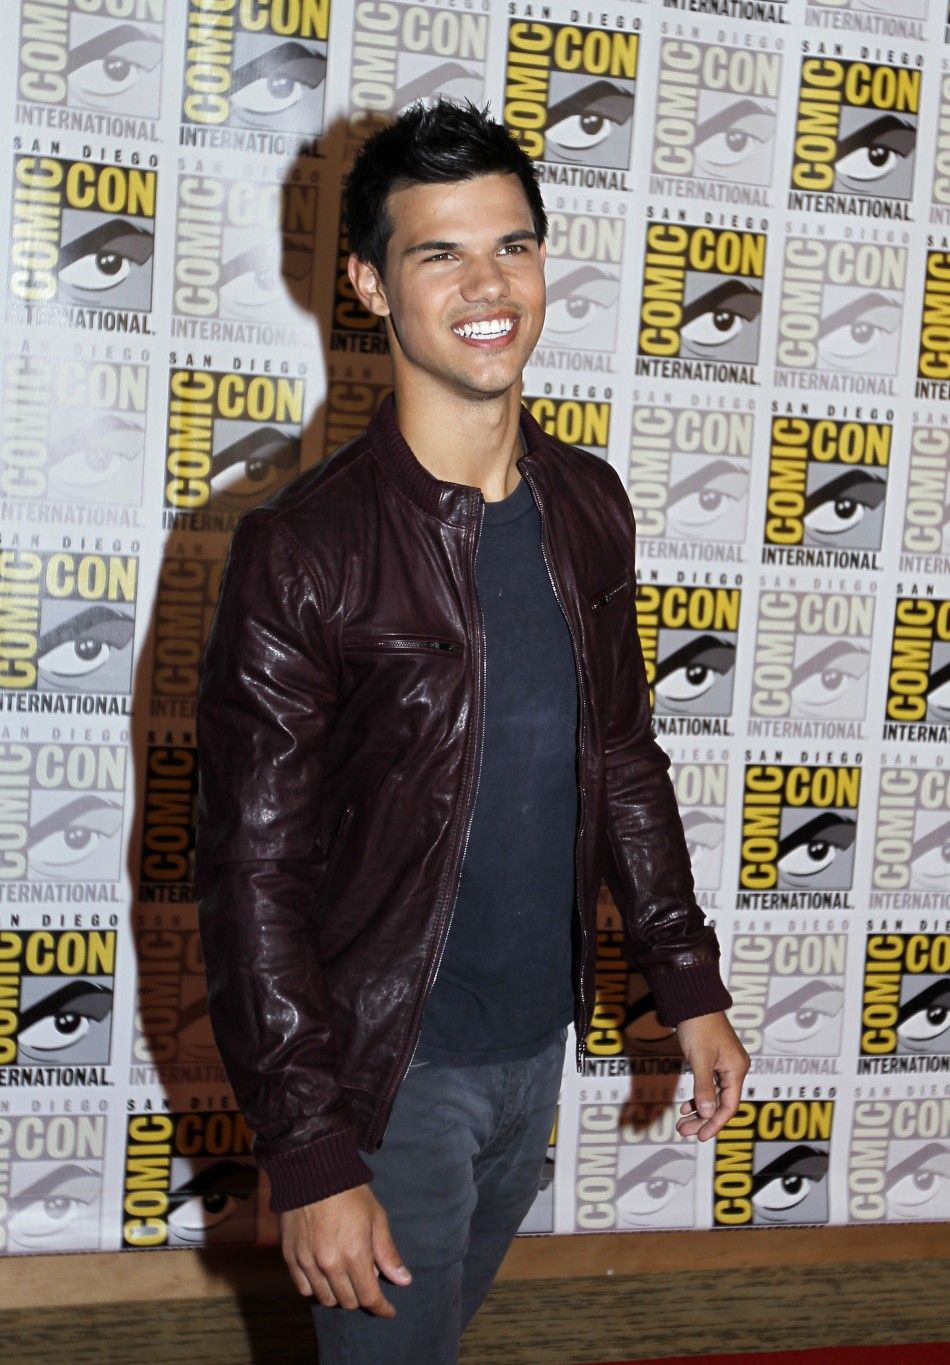 Taylor Lautner poses to promote quotBreaking Dawnquot from the Twilight Saga at Comic Con in San Diego